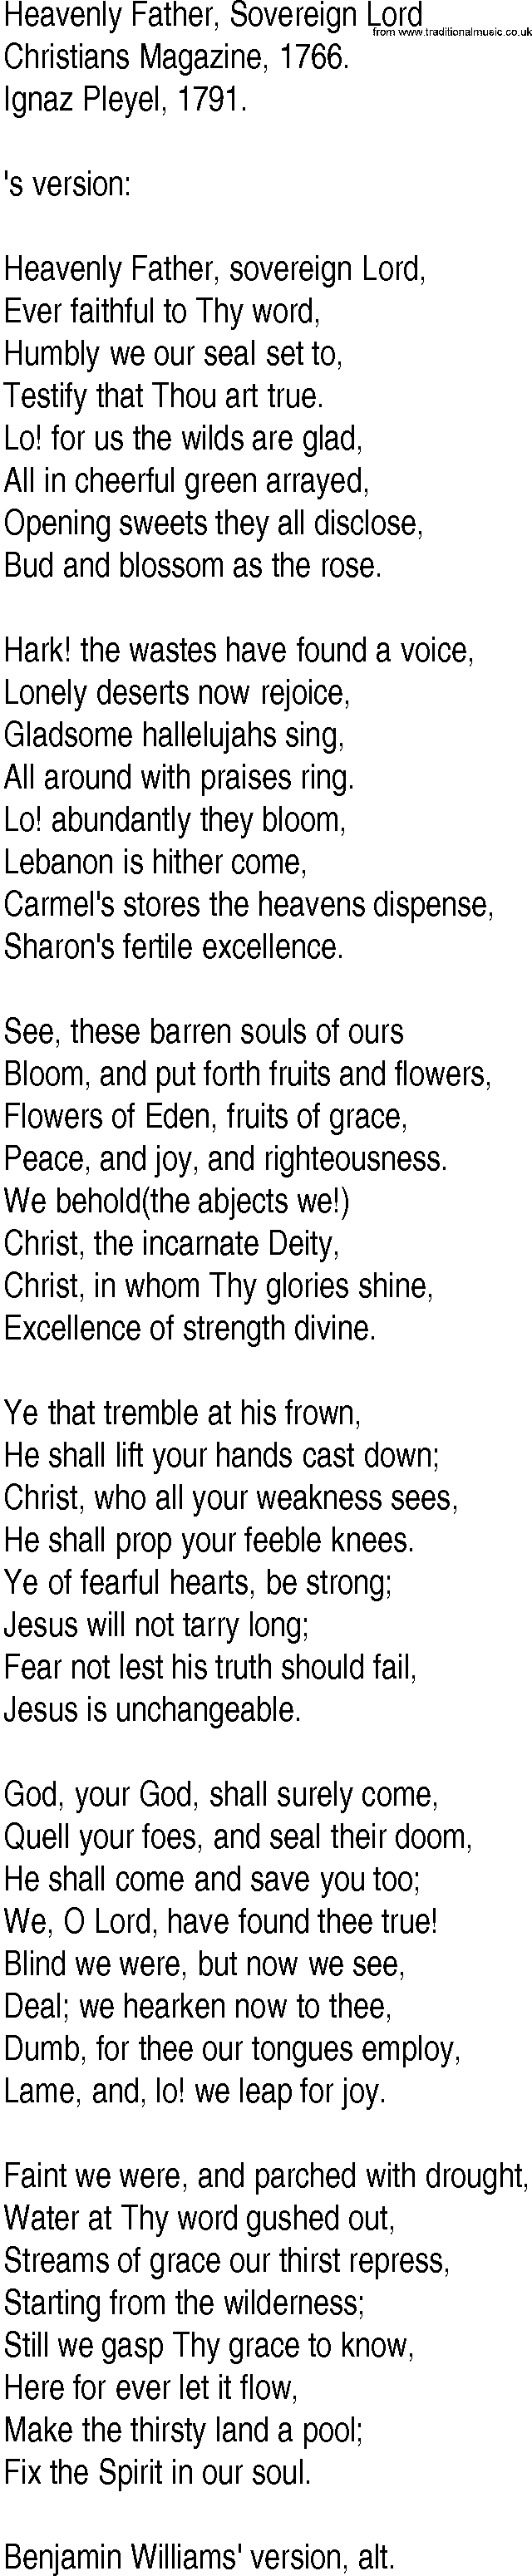 Hymn and Gospel Song: Heavenly Father, Sovereign Lord by Christians Magazine lyrics